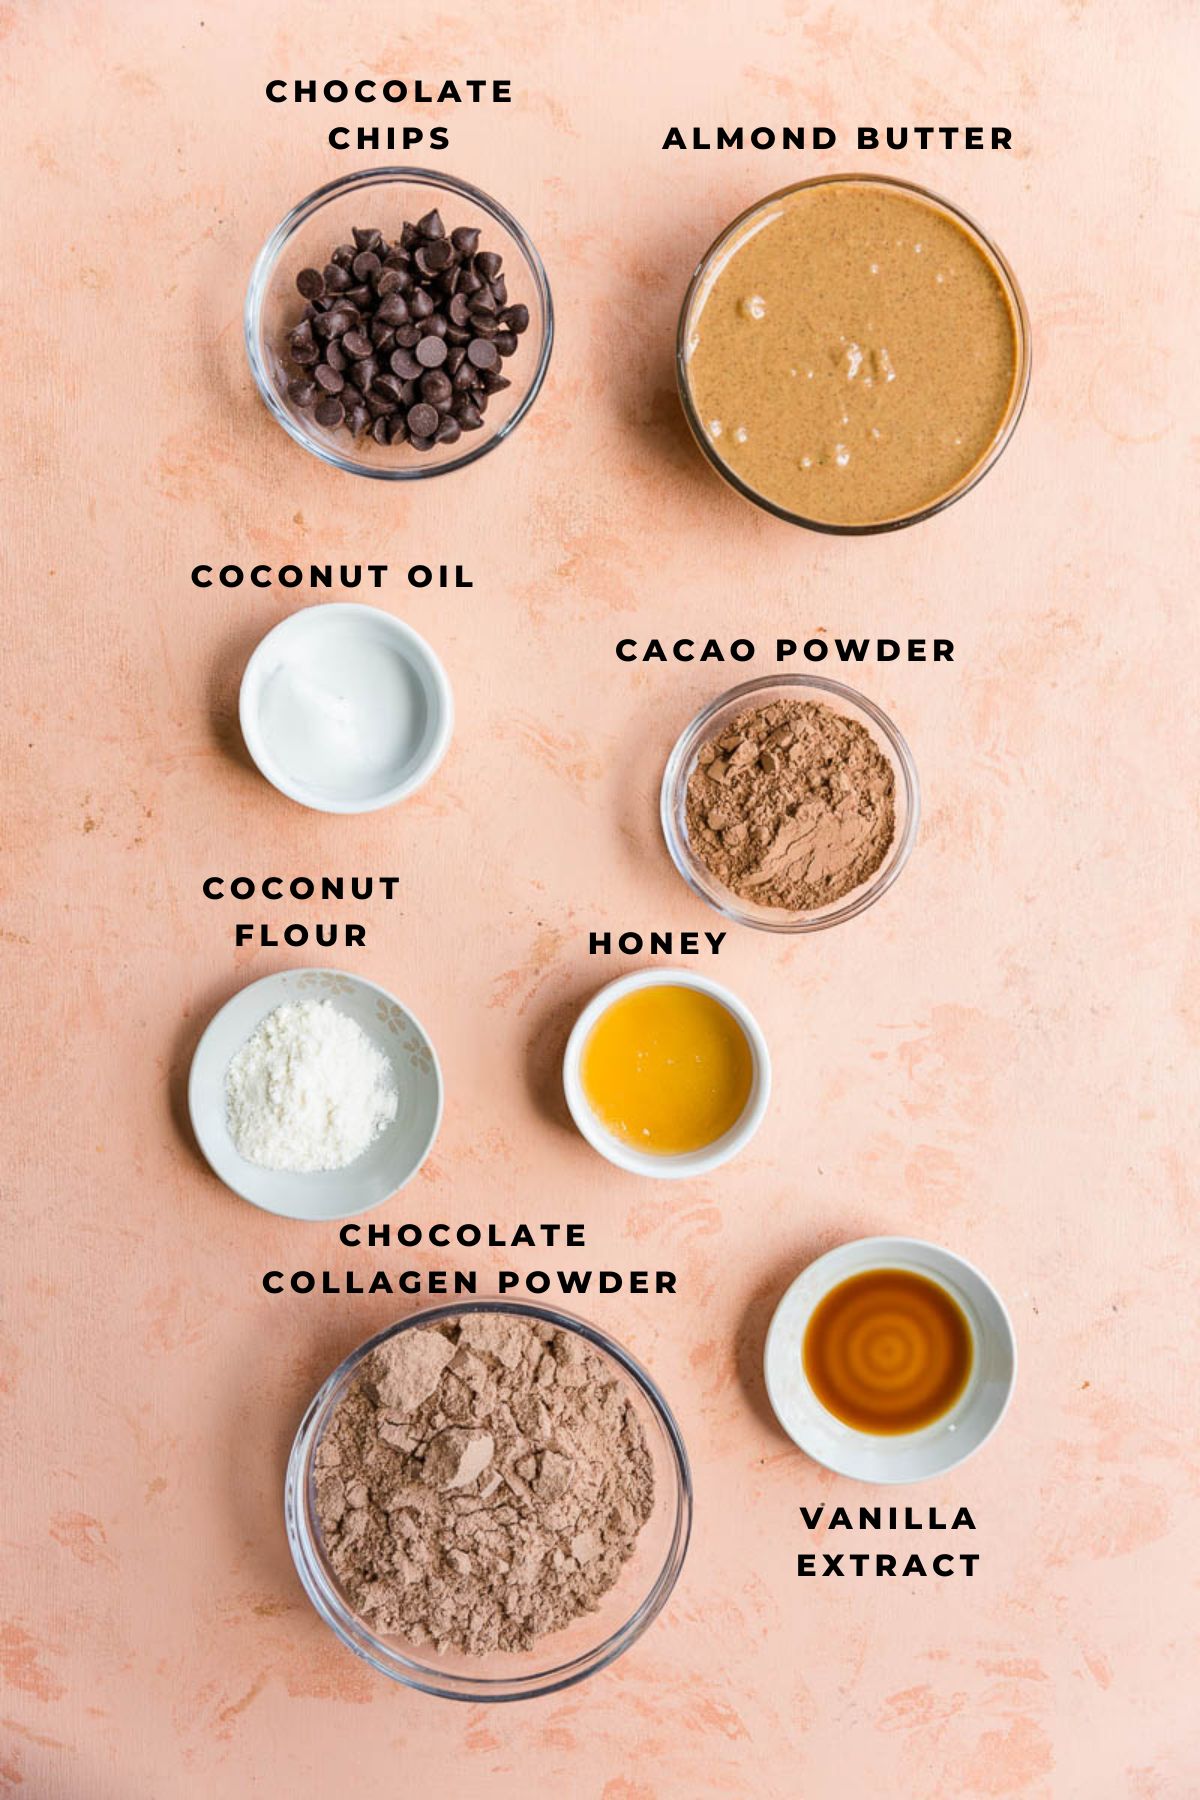 Chocolate protein bar ingredients measured out into small cups.